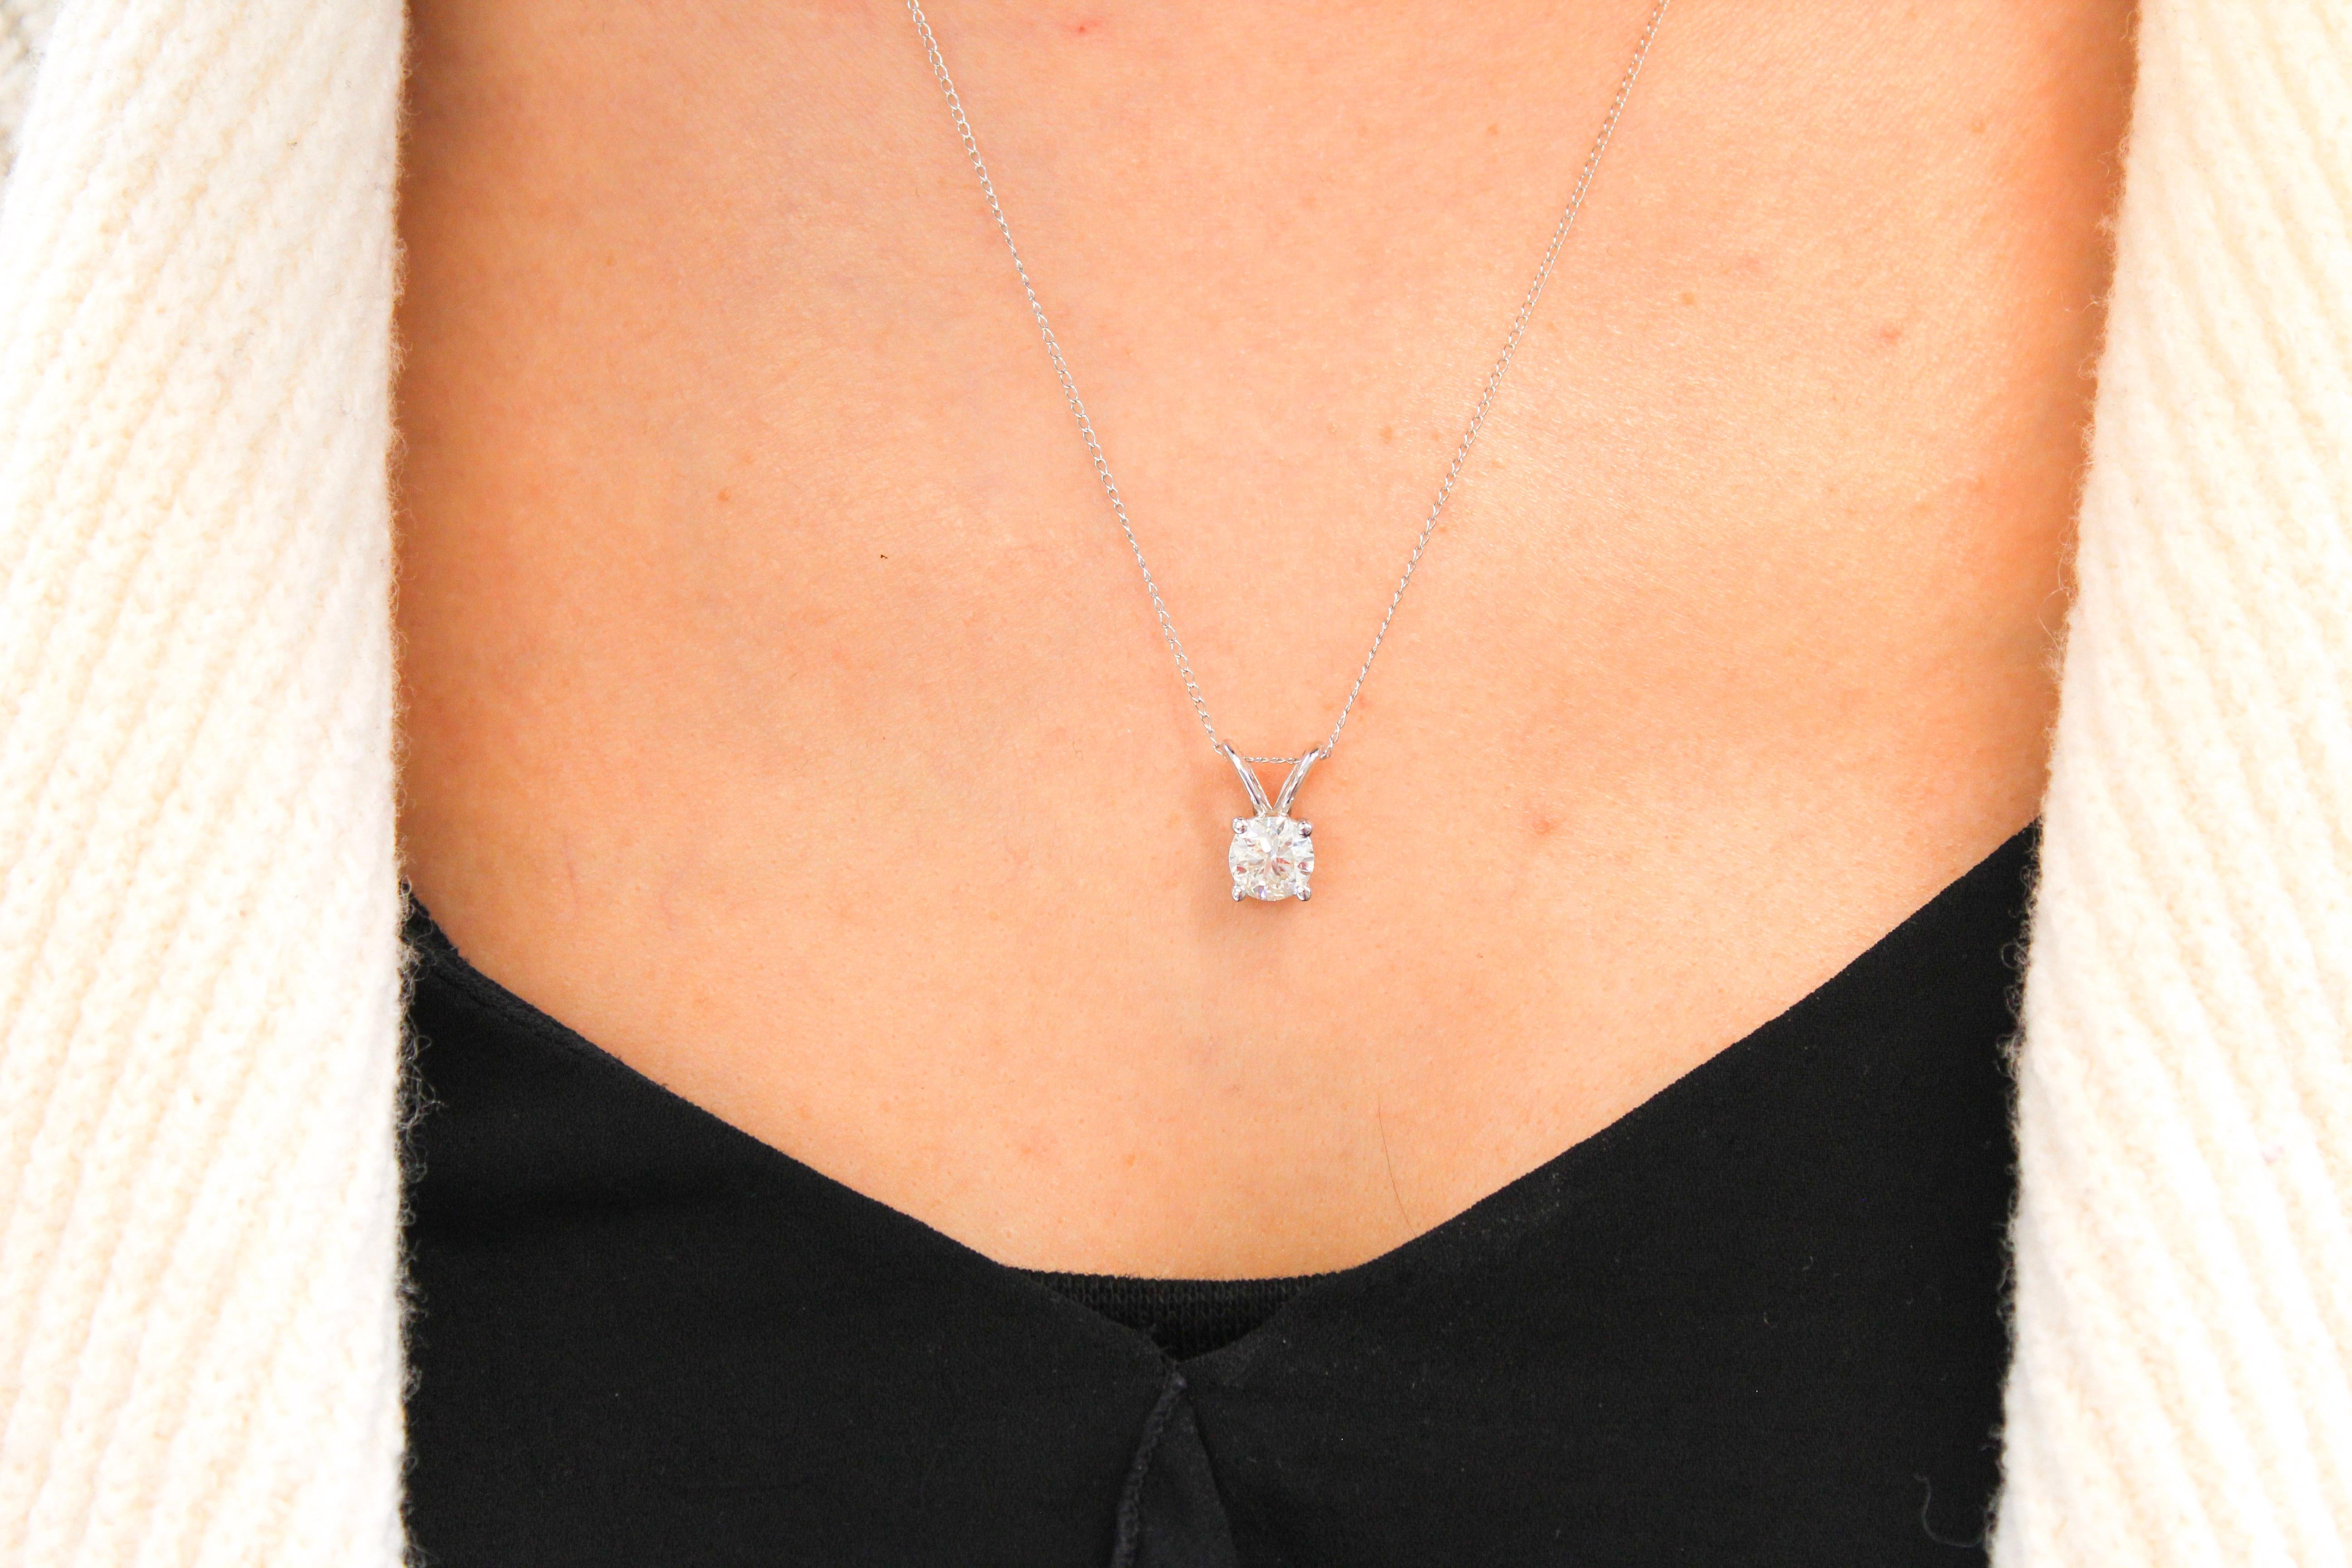 This impressive diamond solitaire pendant is finely crafted in brightly polished 14 karat rose gold and features a round shaped 0.50 carat diamond that has I1 clarity, gracefully prong set on a shiny split bail. Ideal as an anniversary or birthday